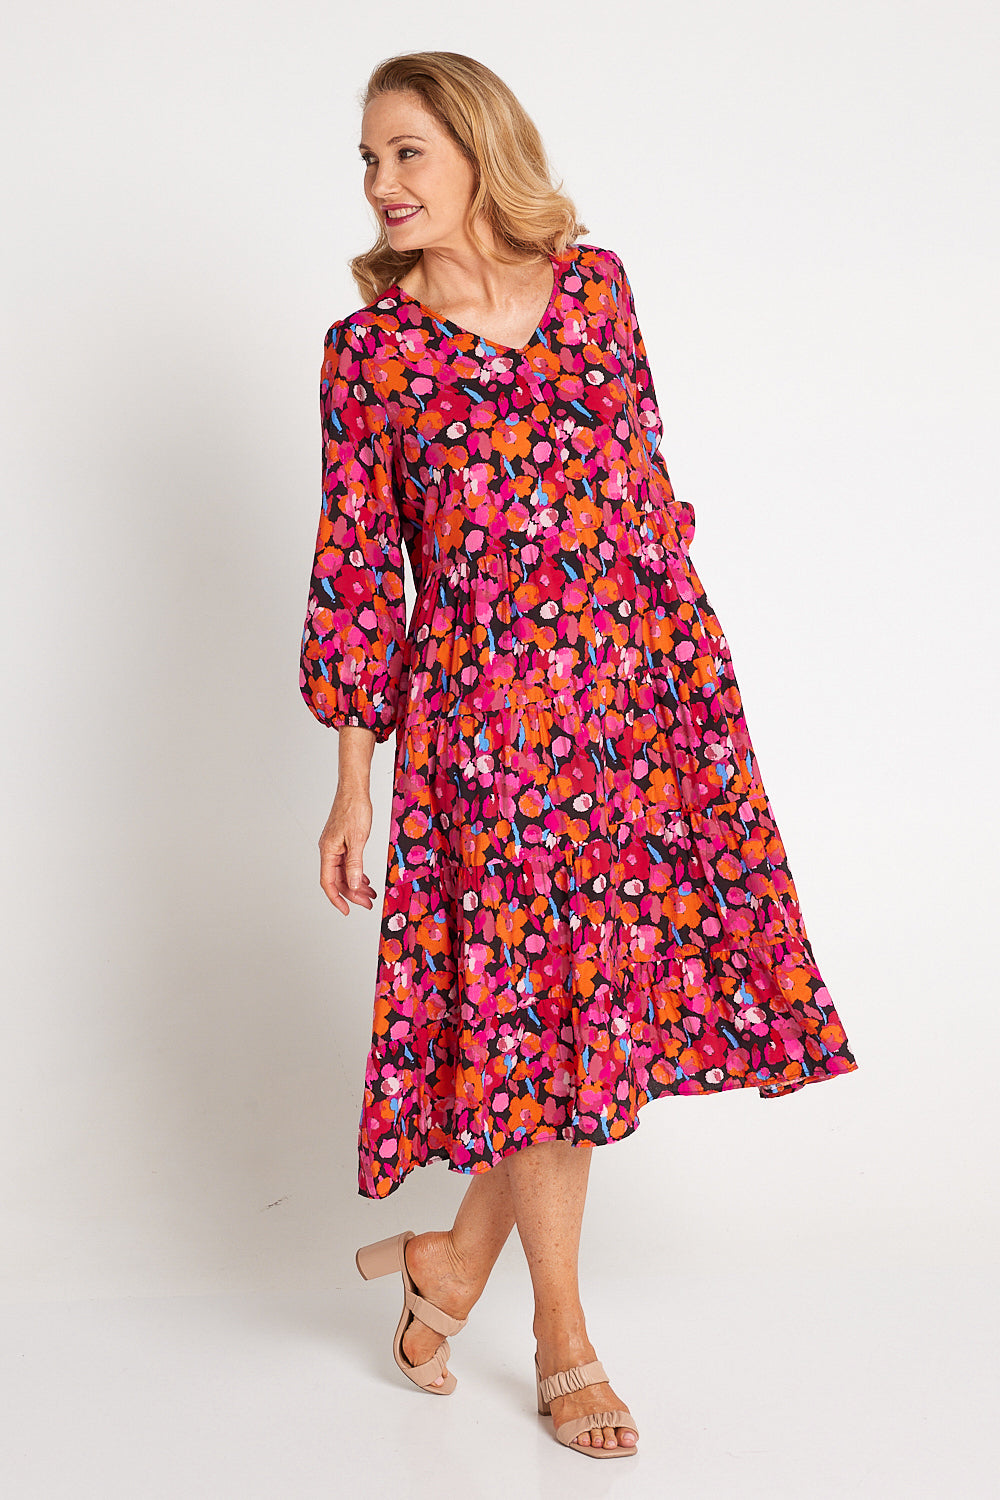 Janie Dress - Brushed Floral | Betty Basics Clothes for Summer – TULIO ...